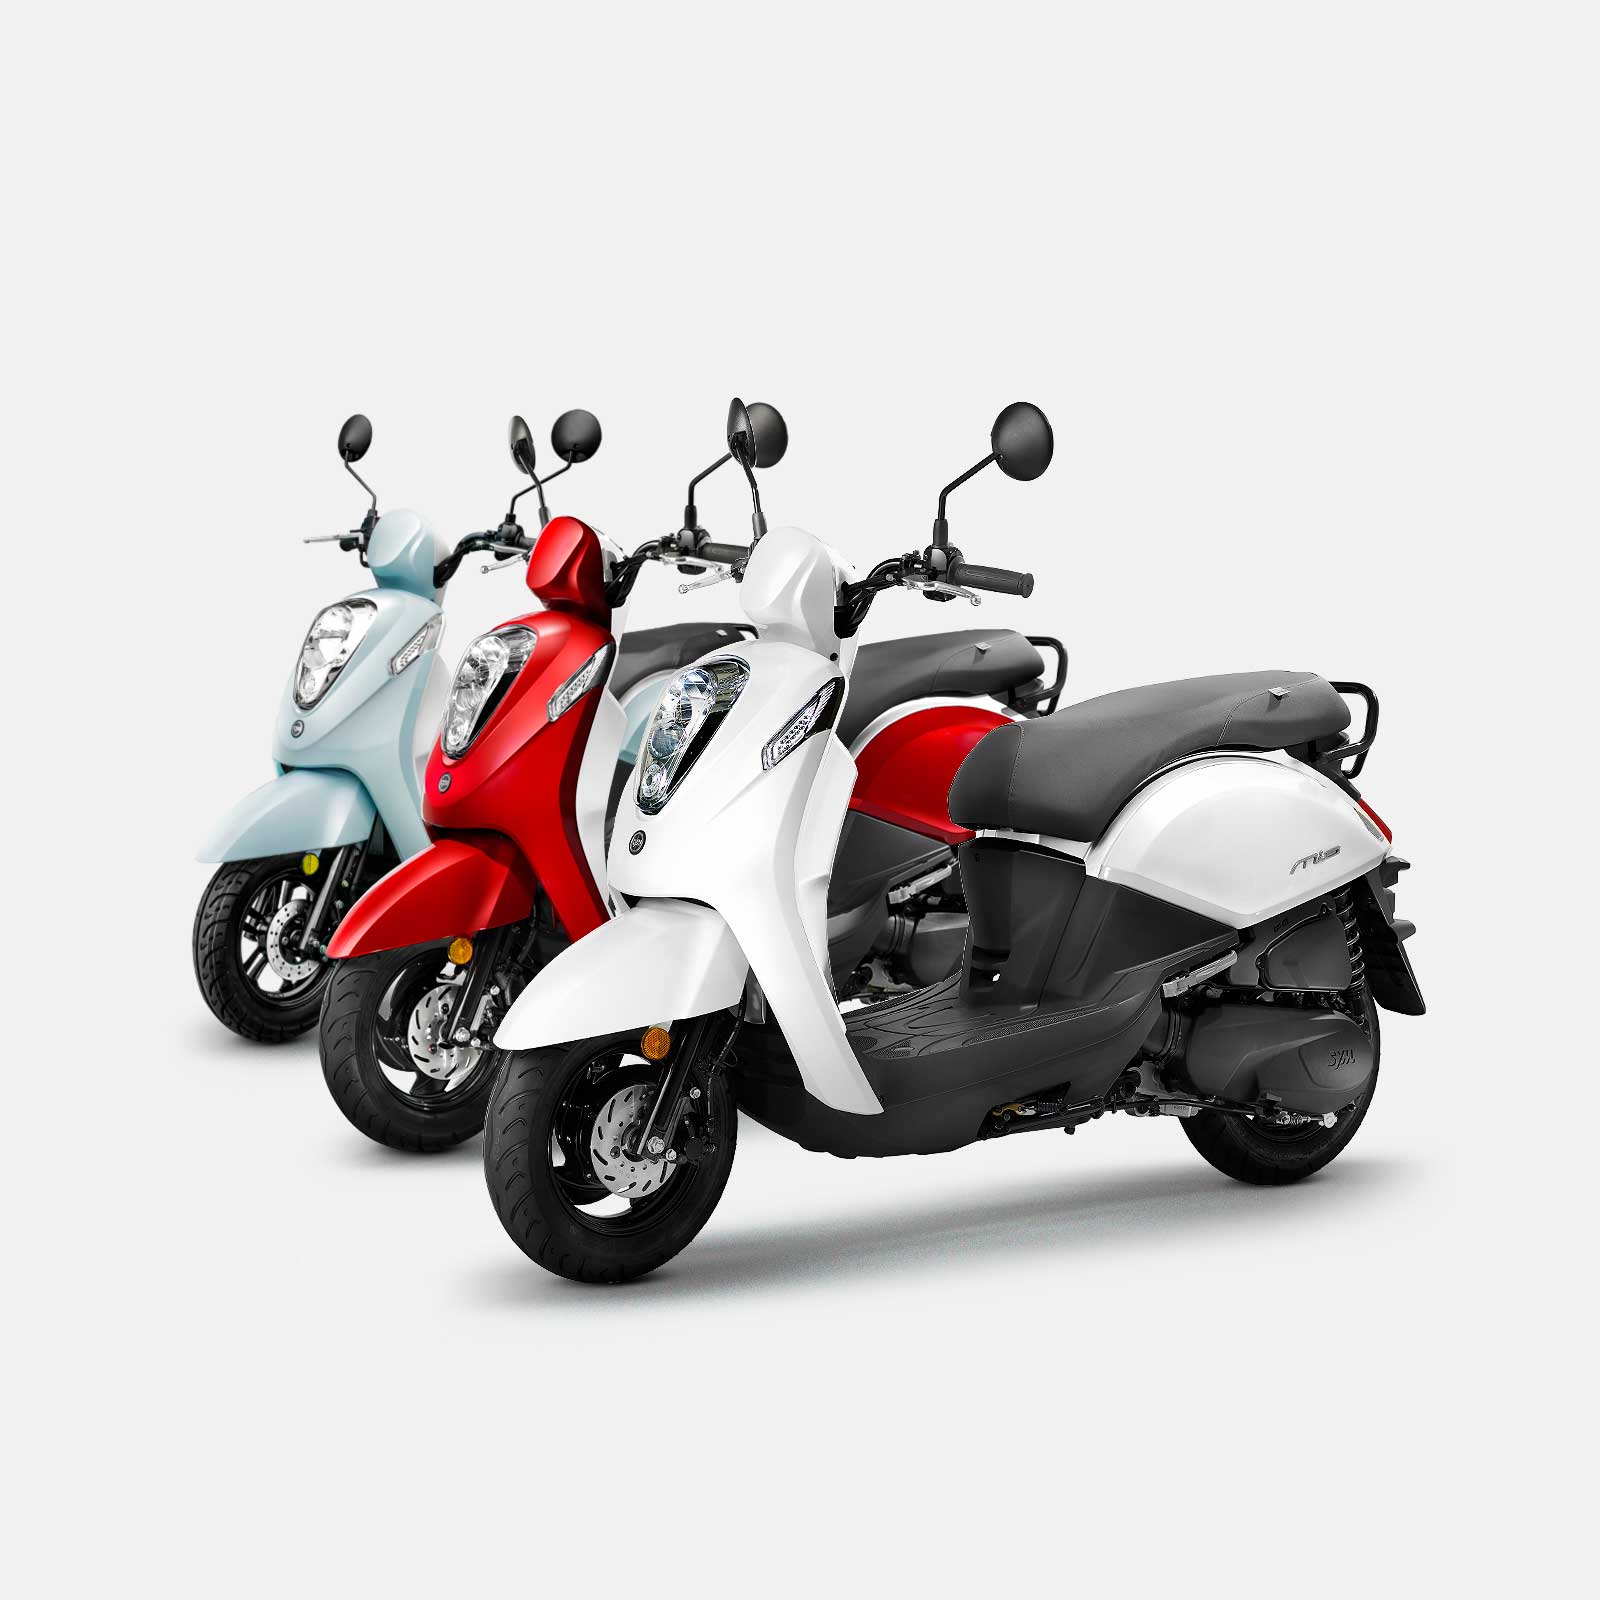 Over the years, the SYM Mio 50 has achieved the status of a classic scooter—and rightfully so, as fun styling along with a 50cc four-stroke engine has kept this little icon on the favorites list.